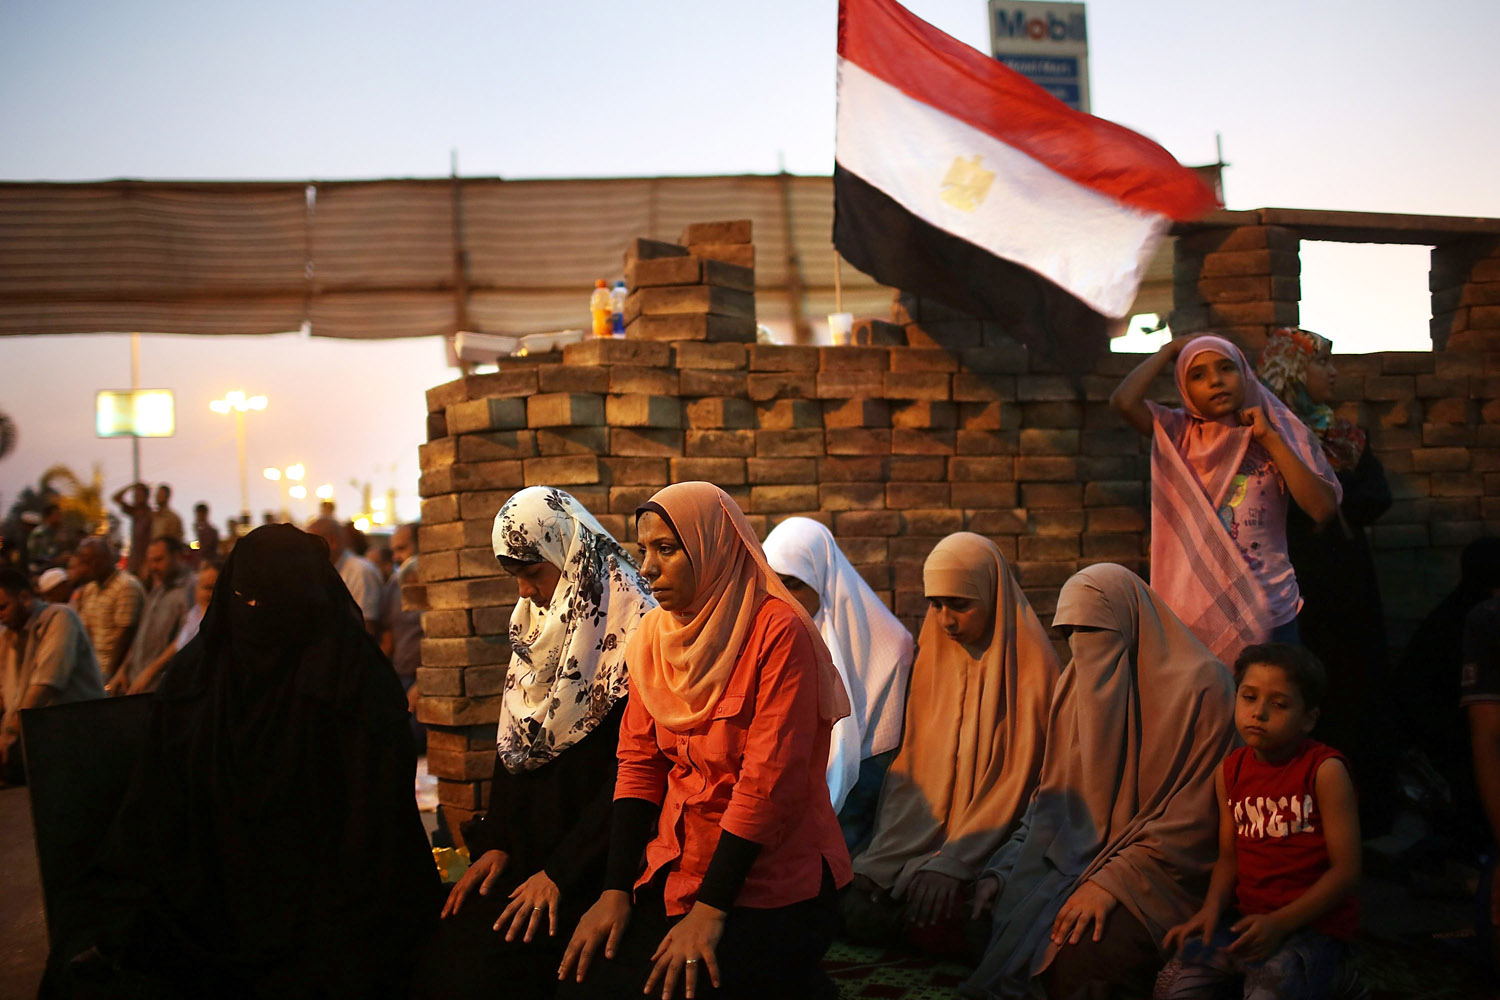 July 12, 2013. Female  supporters of ousted president Mohamed Morsi participate in the evening Friday prayer on the third day of Ramadan, the sacred holy month for Muslims where many will fast from sun-up to sun-down in Cairo, Egypt.